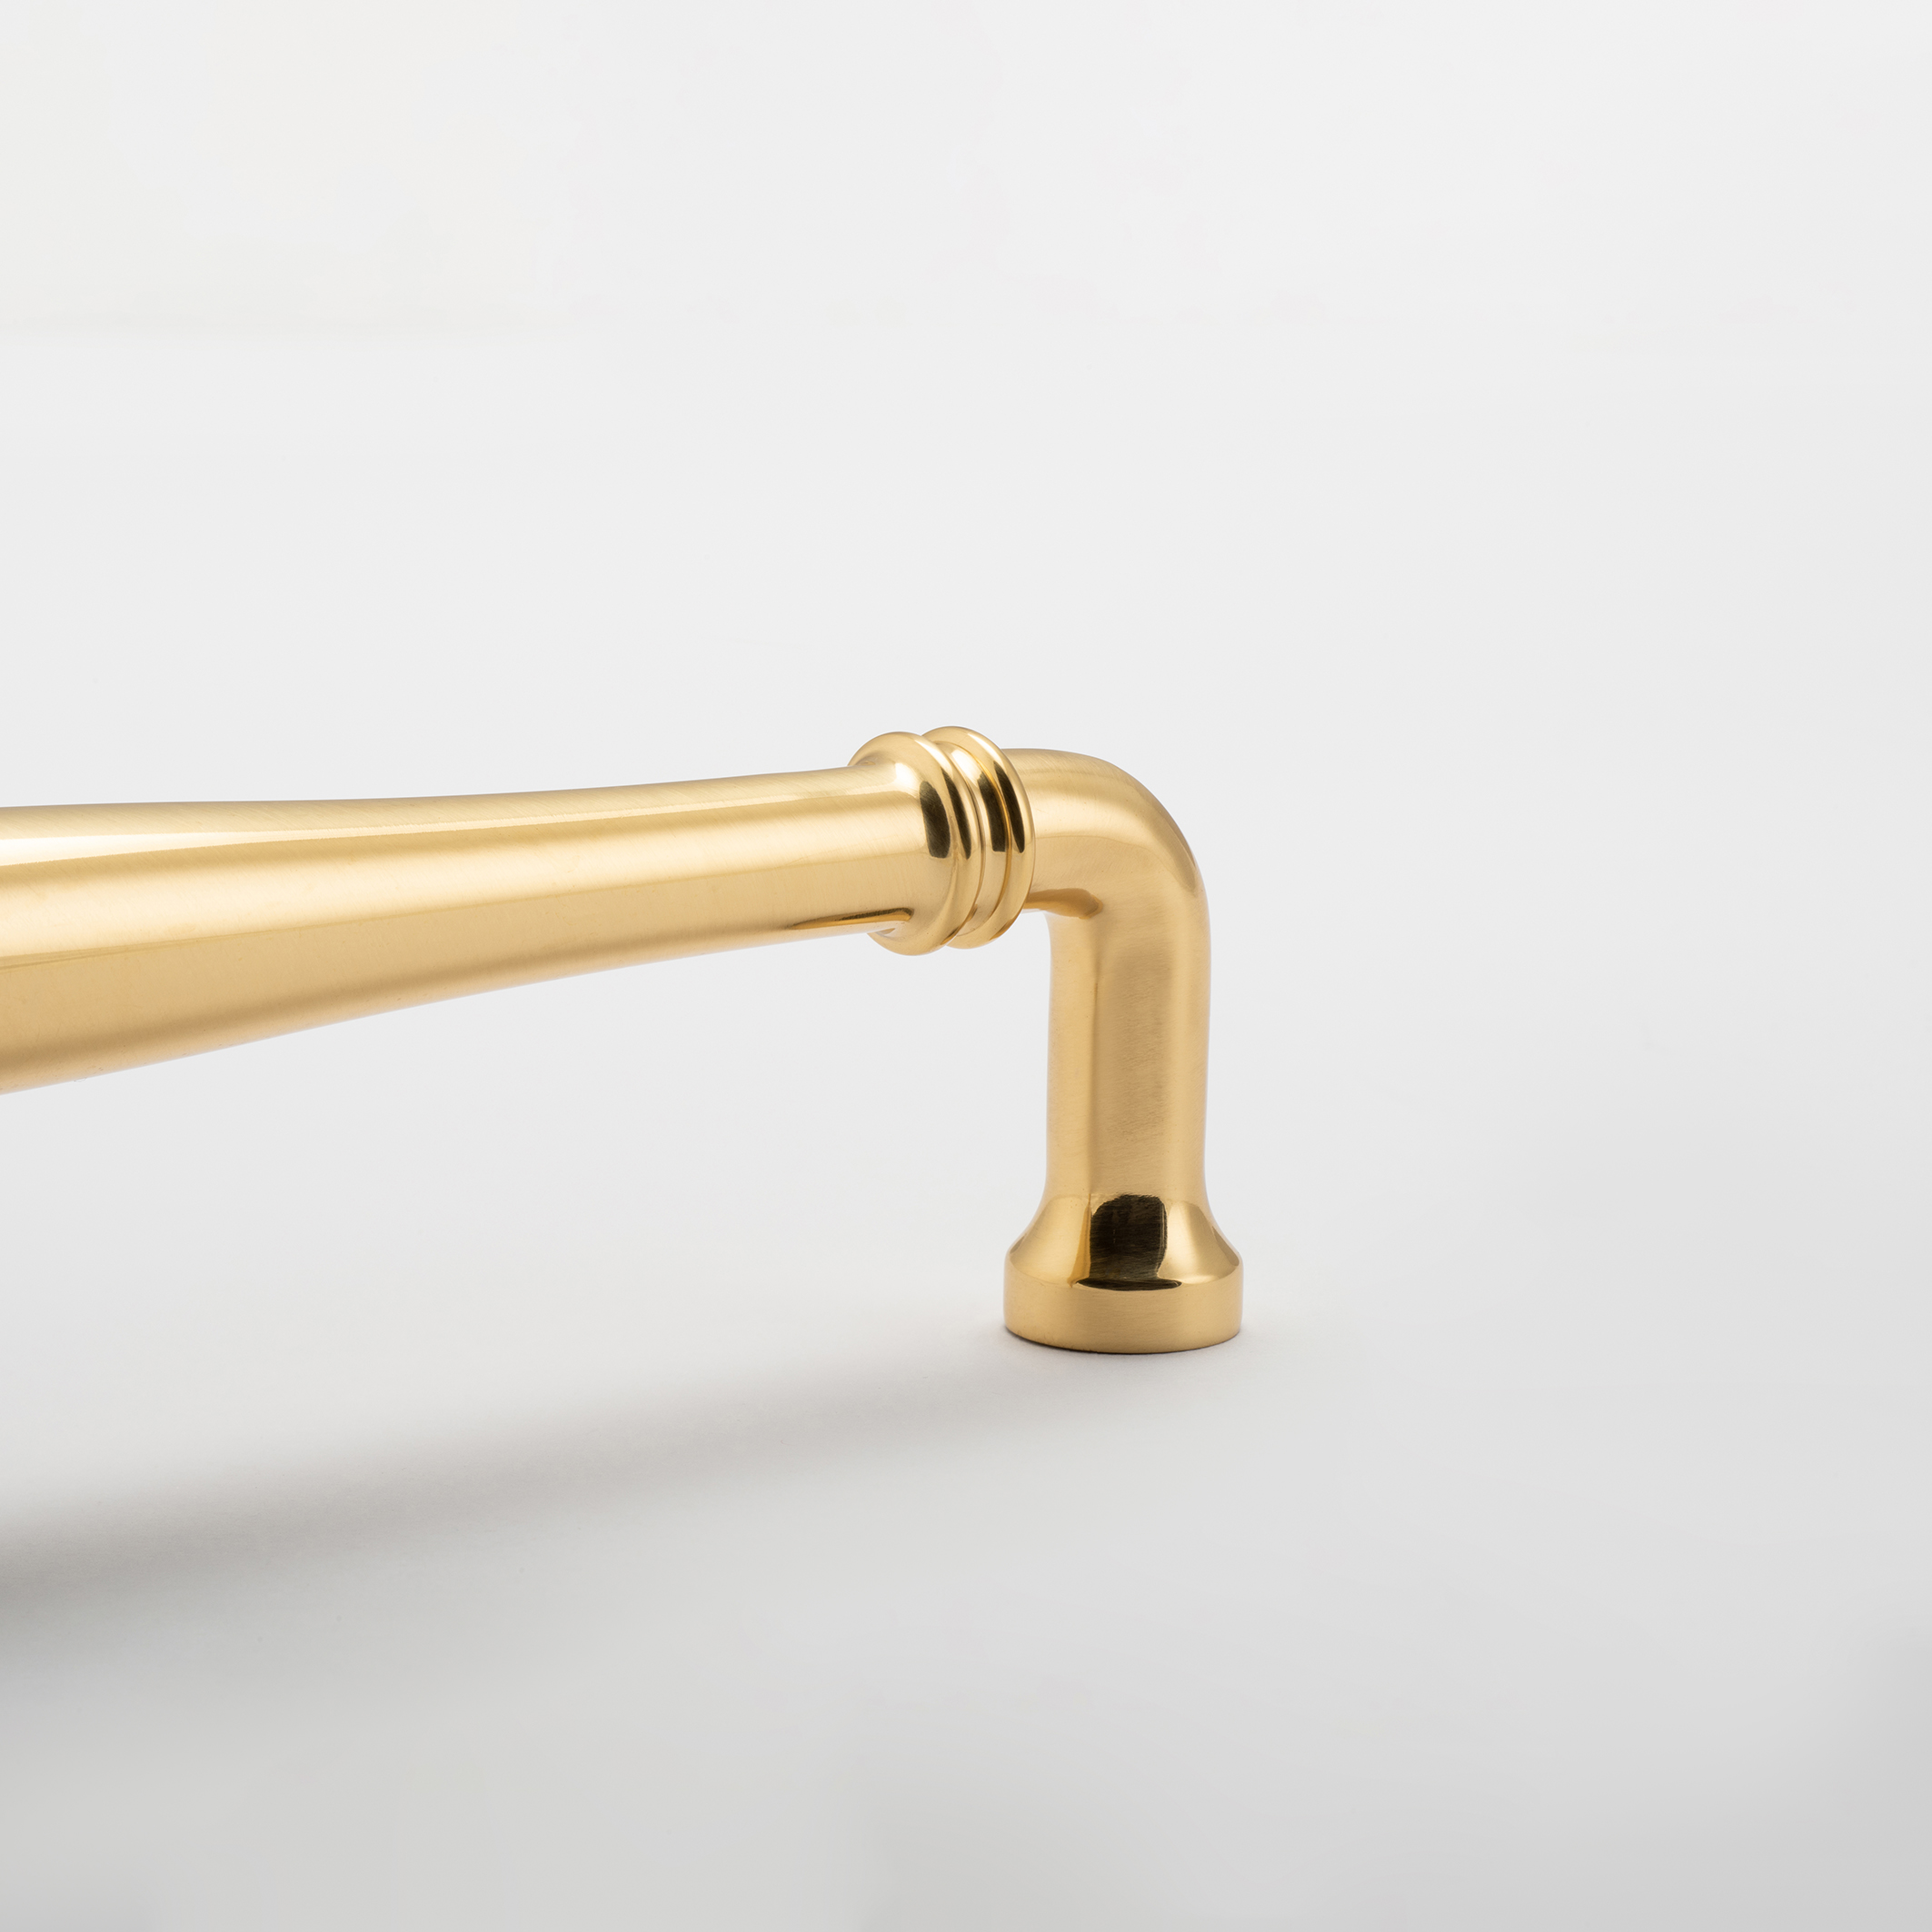 21100B - Sarlat Cabinet Pull with Backplate - CTC450mm - Polished Brass